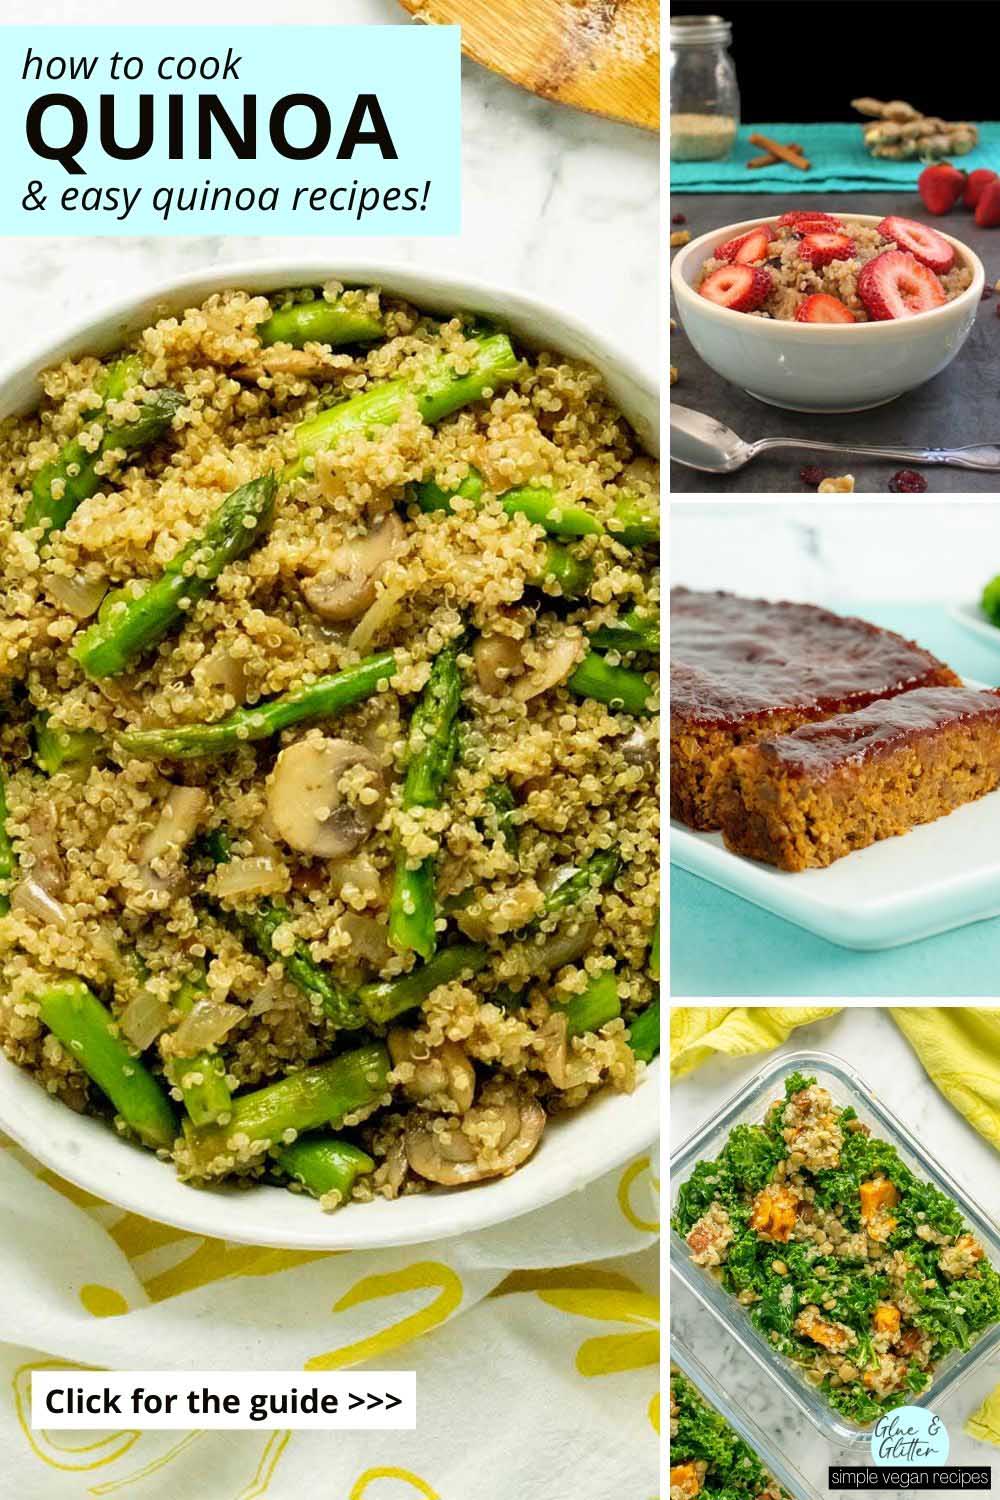 image collage of quinoa dishes with text that reads, "How to Cook Quinoa & Easy Quinoa Recipes"